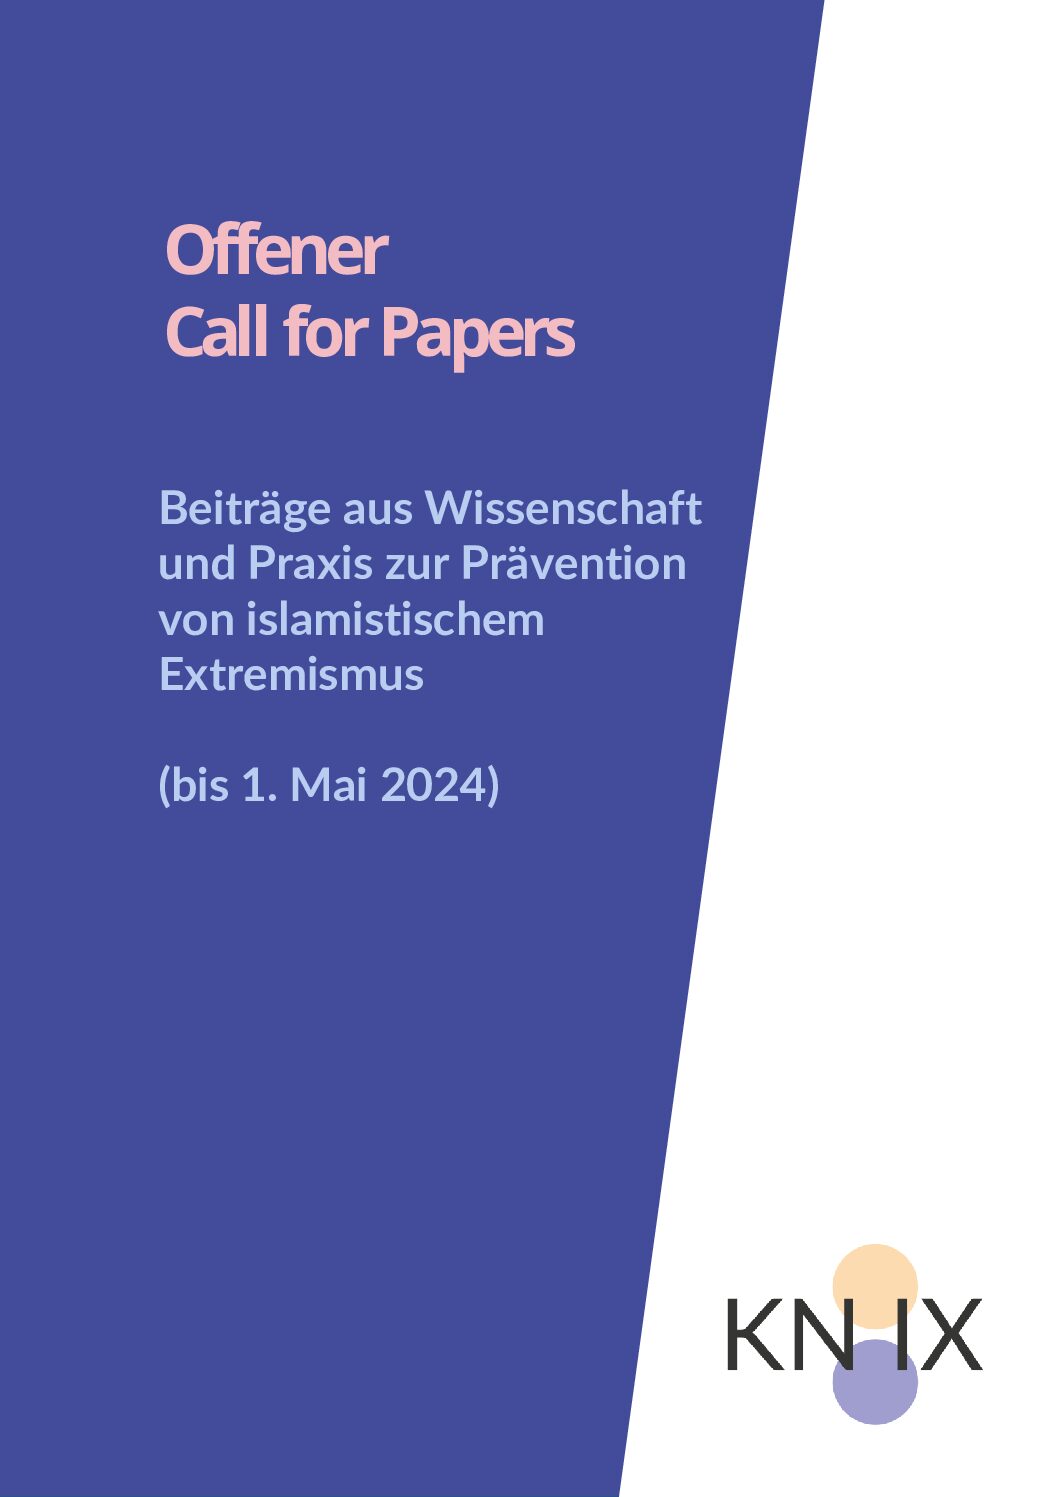 KNIX_Offener_Call for Papers_2024(2)